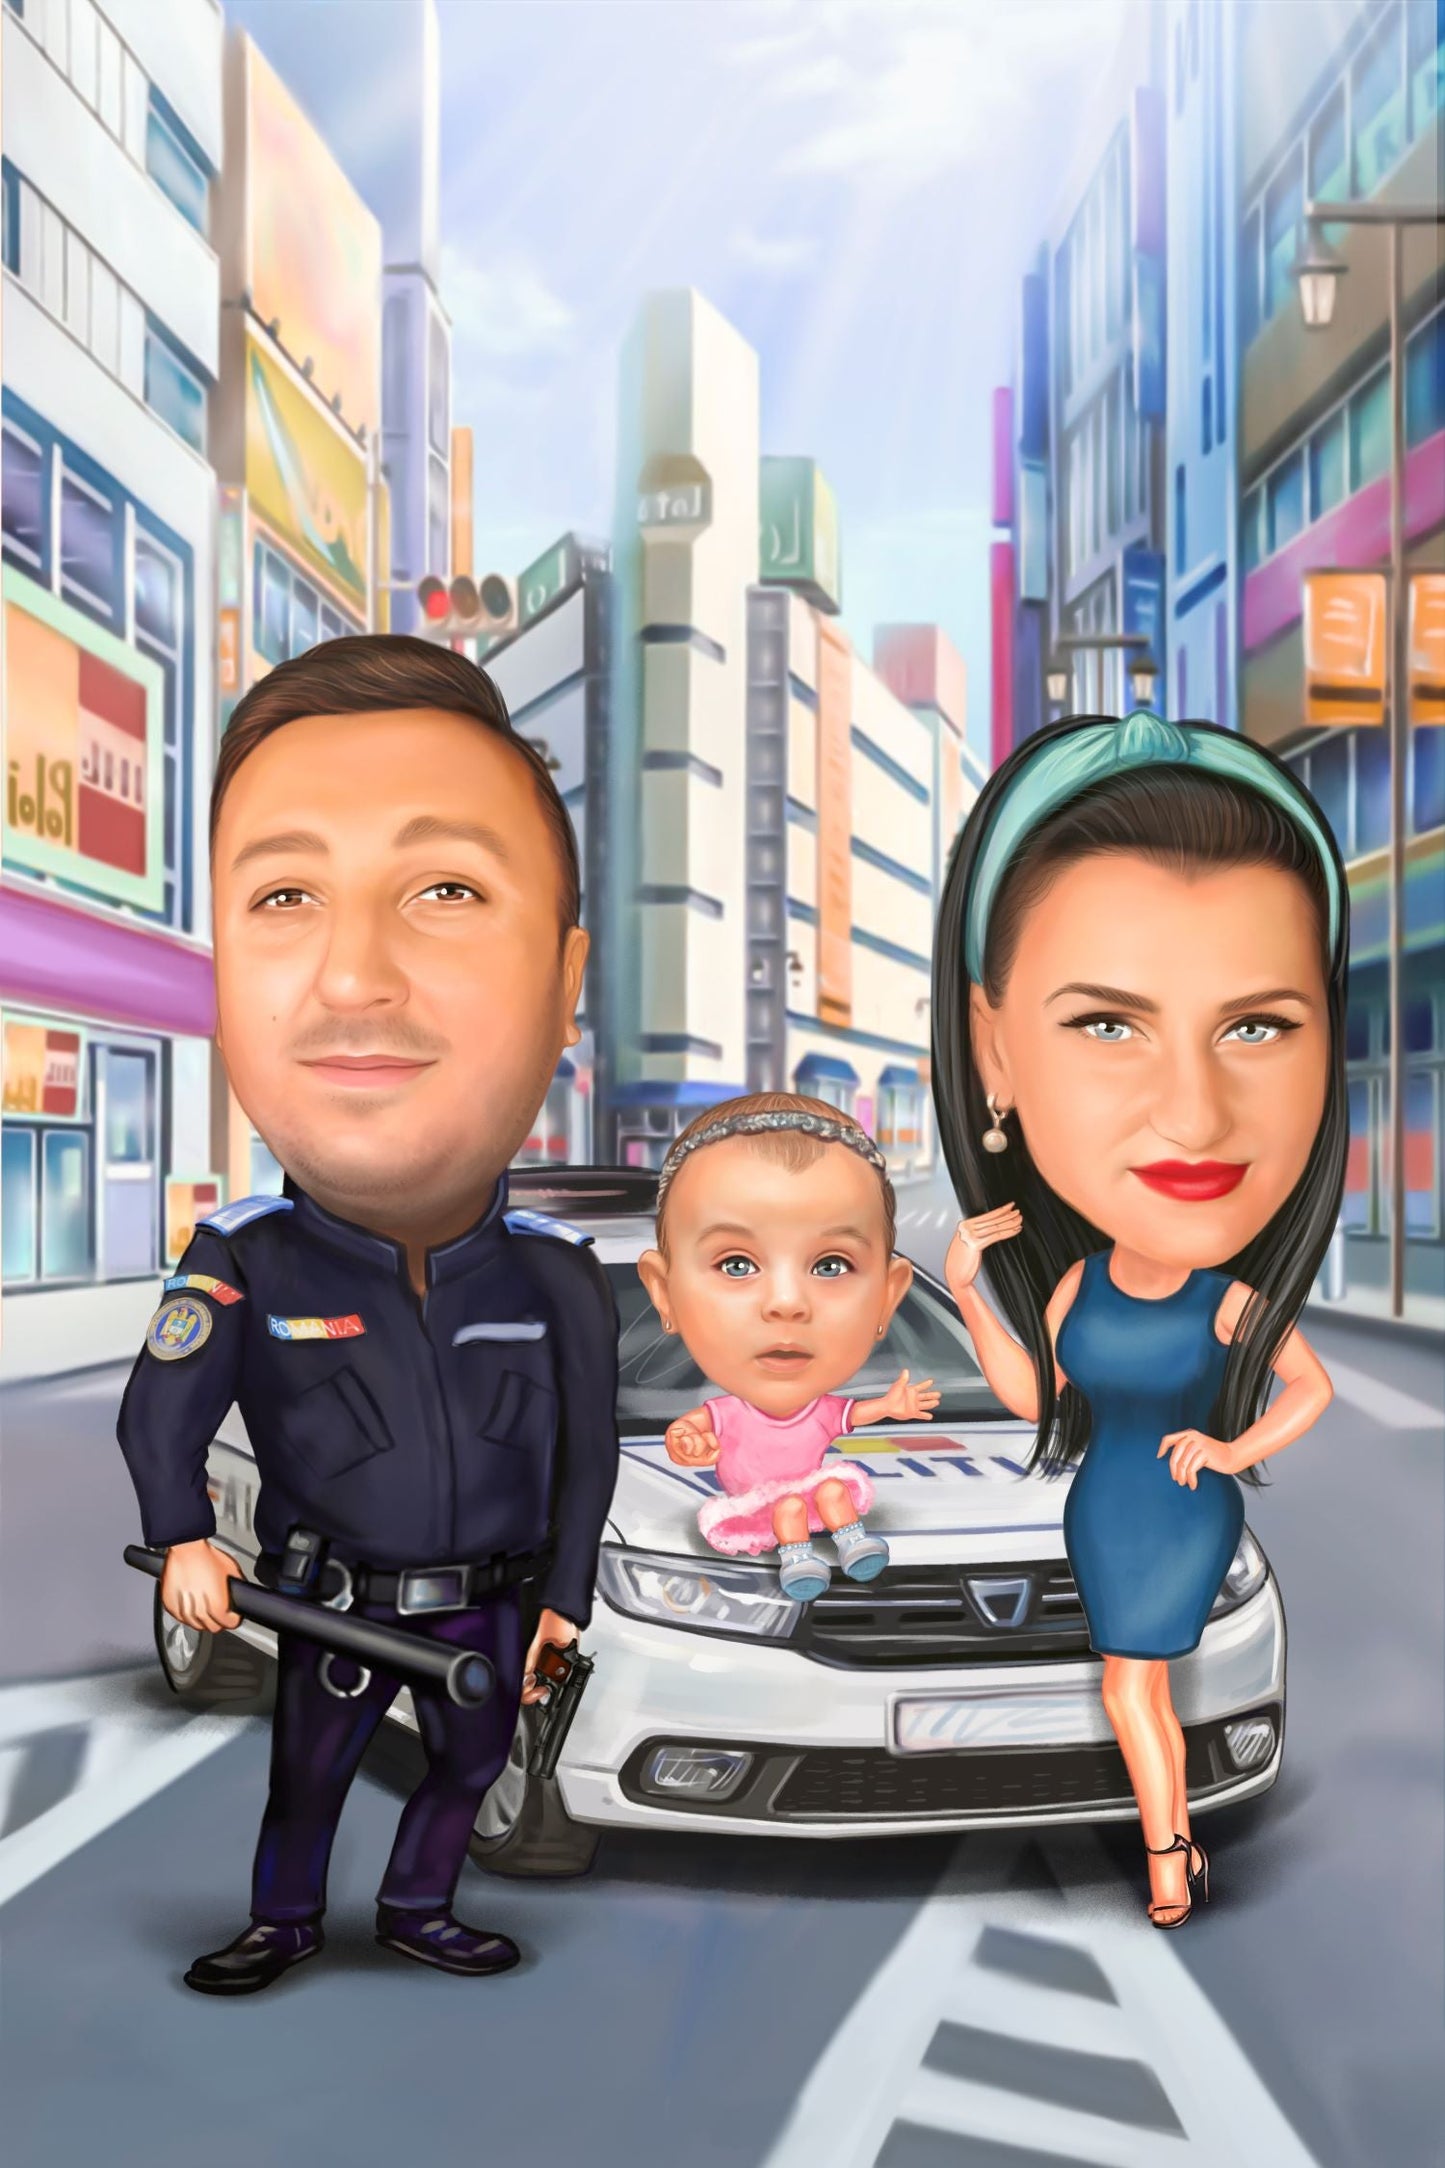 Policeman & the police car family caricature